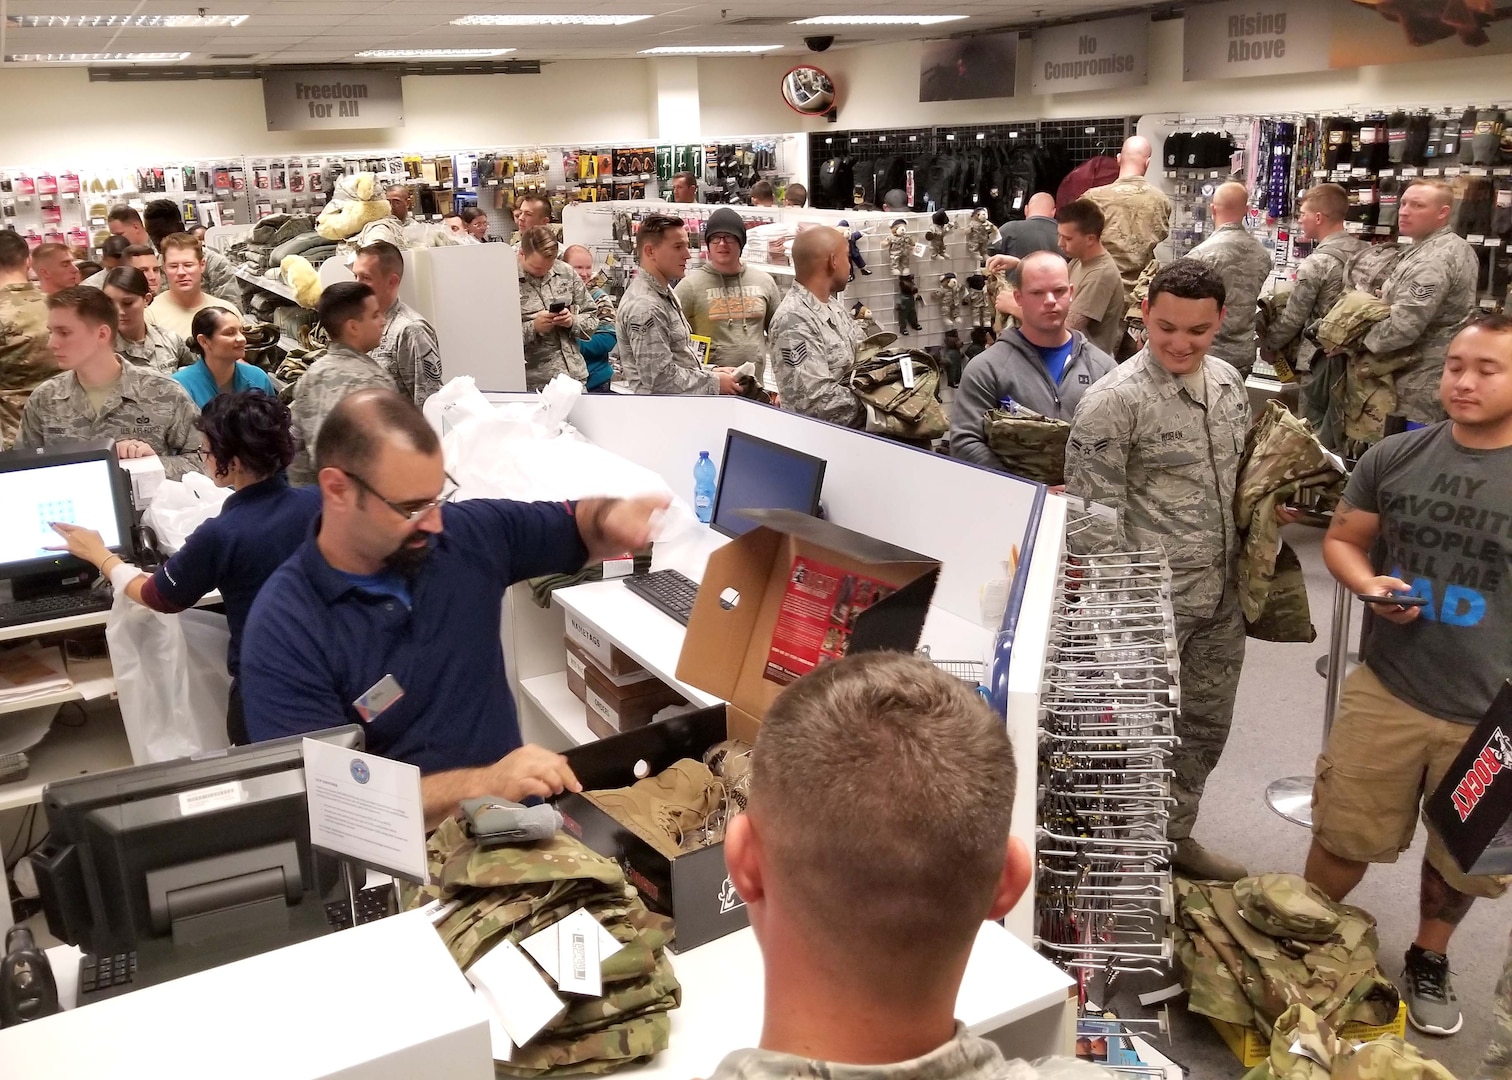 Airmen at Aviano Air Base, Italy filled the Army and Air Force Exchange Service sales store to purchase the Operational Camouflage Pattern utility uniform October 1, 2018. DLA Troop Support Clothing and Textiles worked with its Air Force counterparts and other key stakeholders since April to ensure more than 17,000 uniforms were delivered to five military clothing sales stores, including Aviano Air Base, Shaw Air Force Base, South Carolina, the Pentagon, Washington, D.C., Joint Base Charleston, South Carolina and MacDill AFB, Florida for the initial fielding.